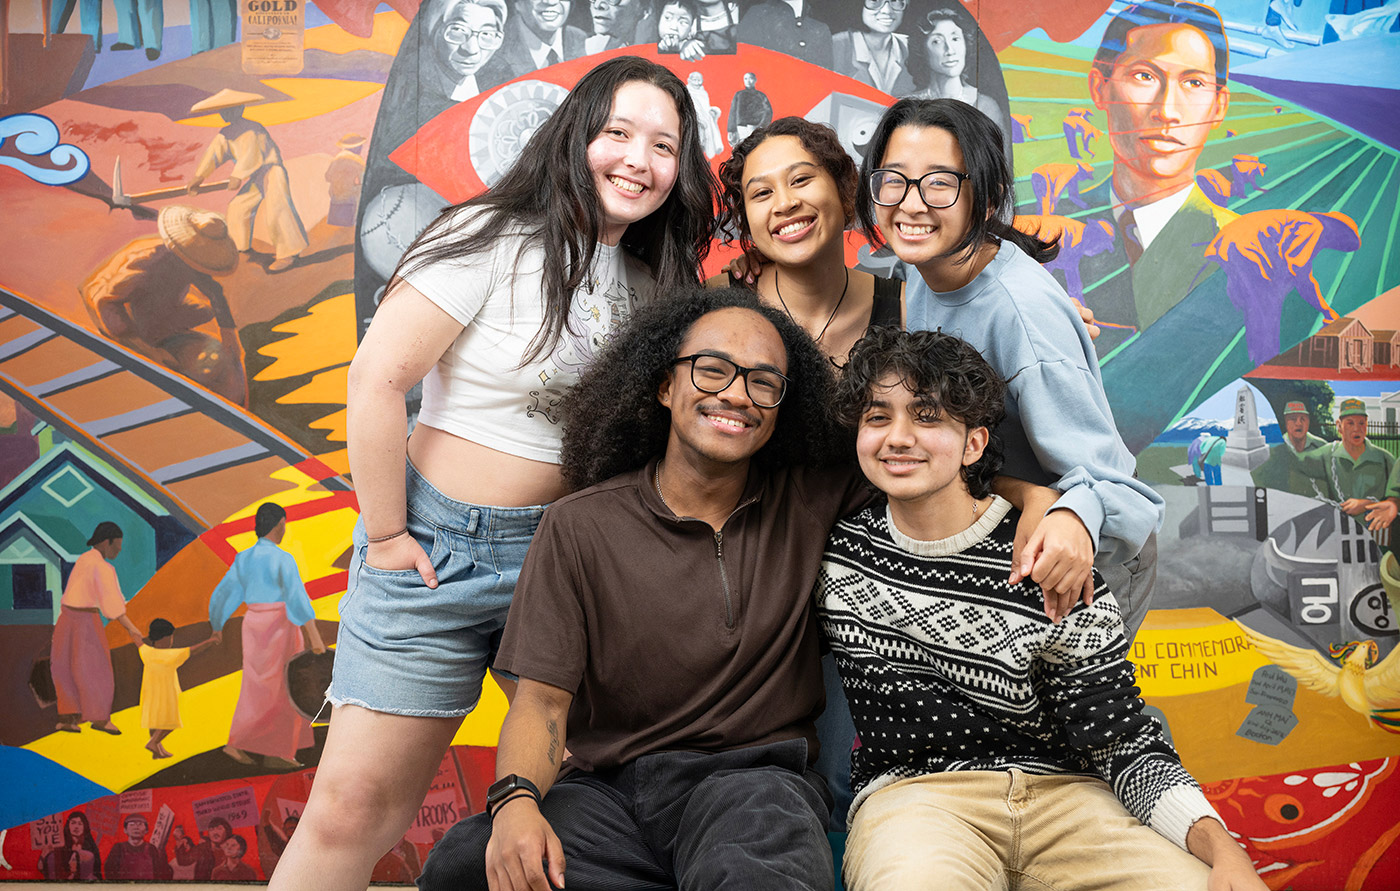 Students pose in front of a mural inside the Asian and Pacific Islander Student Center